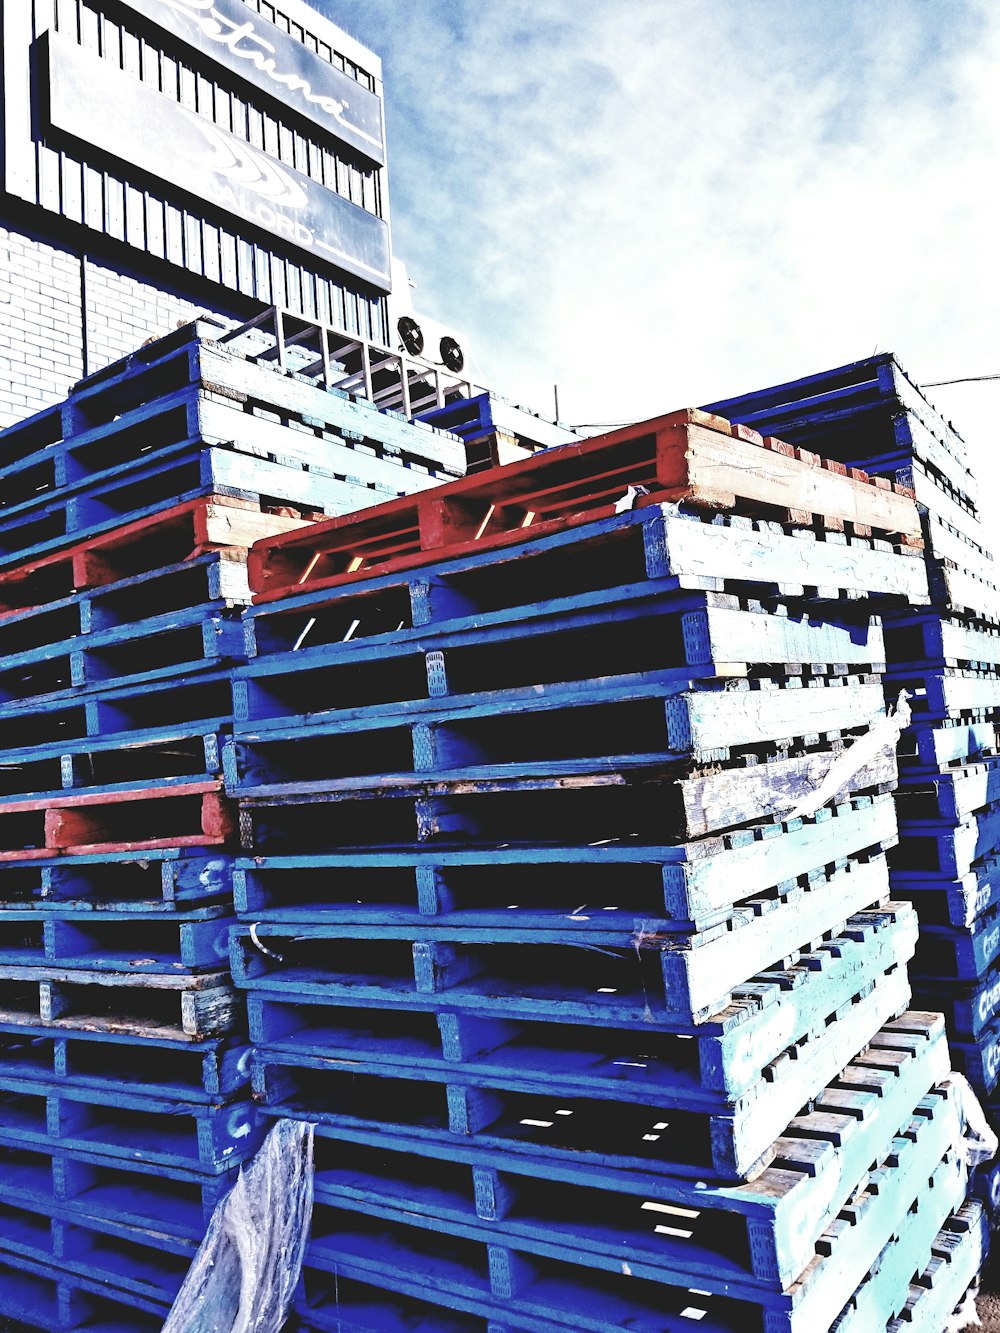 blue and red wooden pallets during daytime